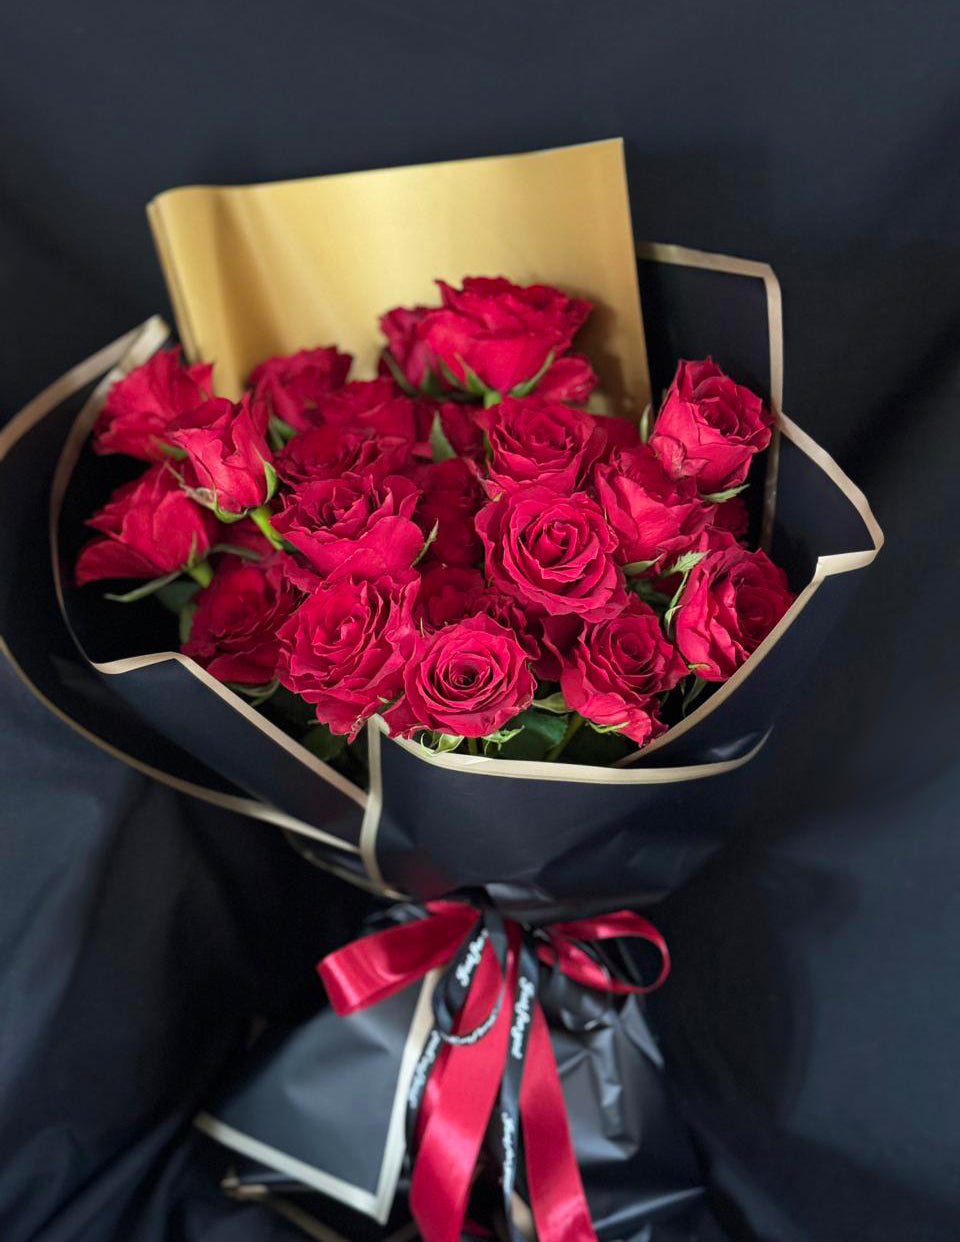 Luxury-Roses-Bouquet-25-DodoMarket-delivery-Mauritius